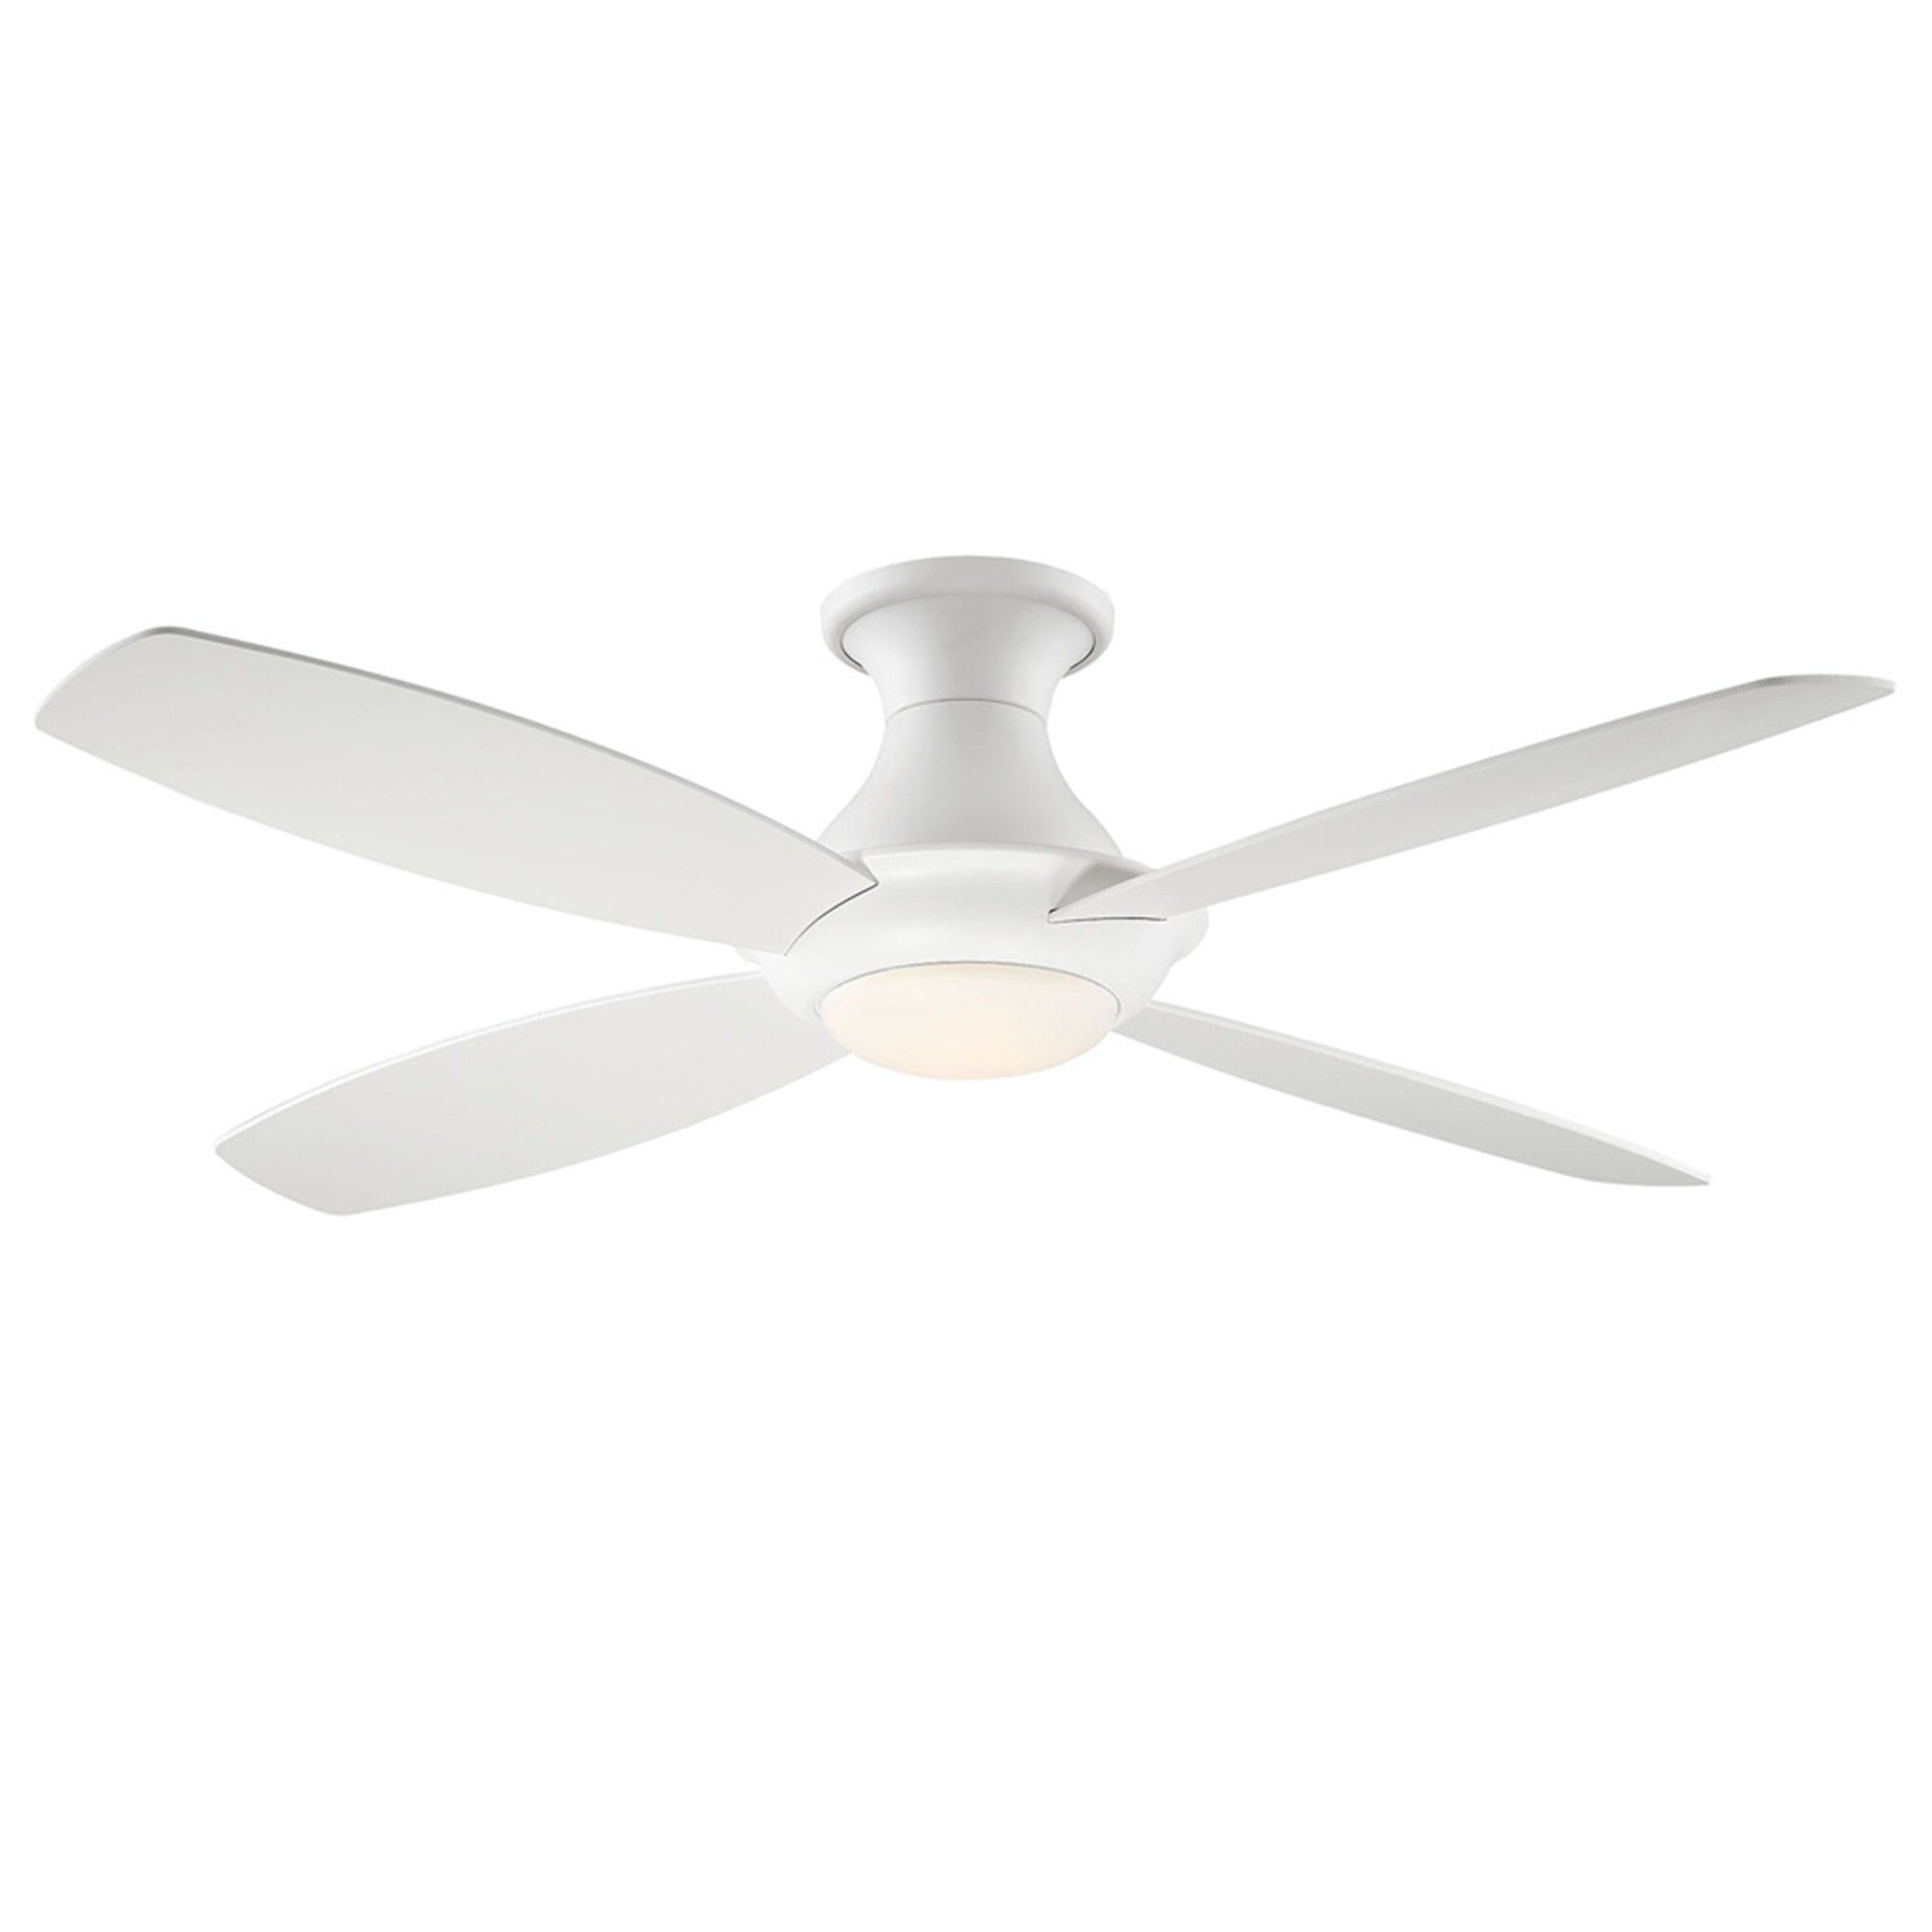 Latest Gean 4 Blade Led Ceiling Fan With Remote, Light Kit Included Pertaining To Cedarton Hugger 5 Blade Led Ceiling Fans (View 18 of 20)